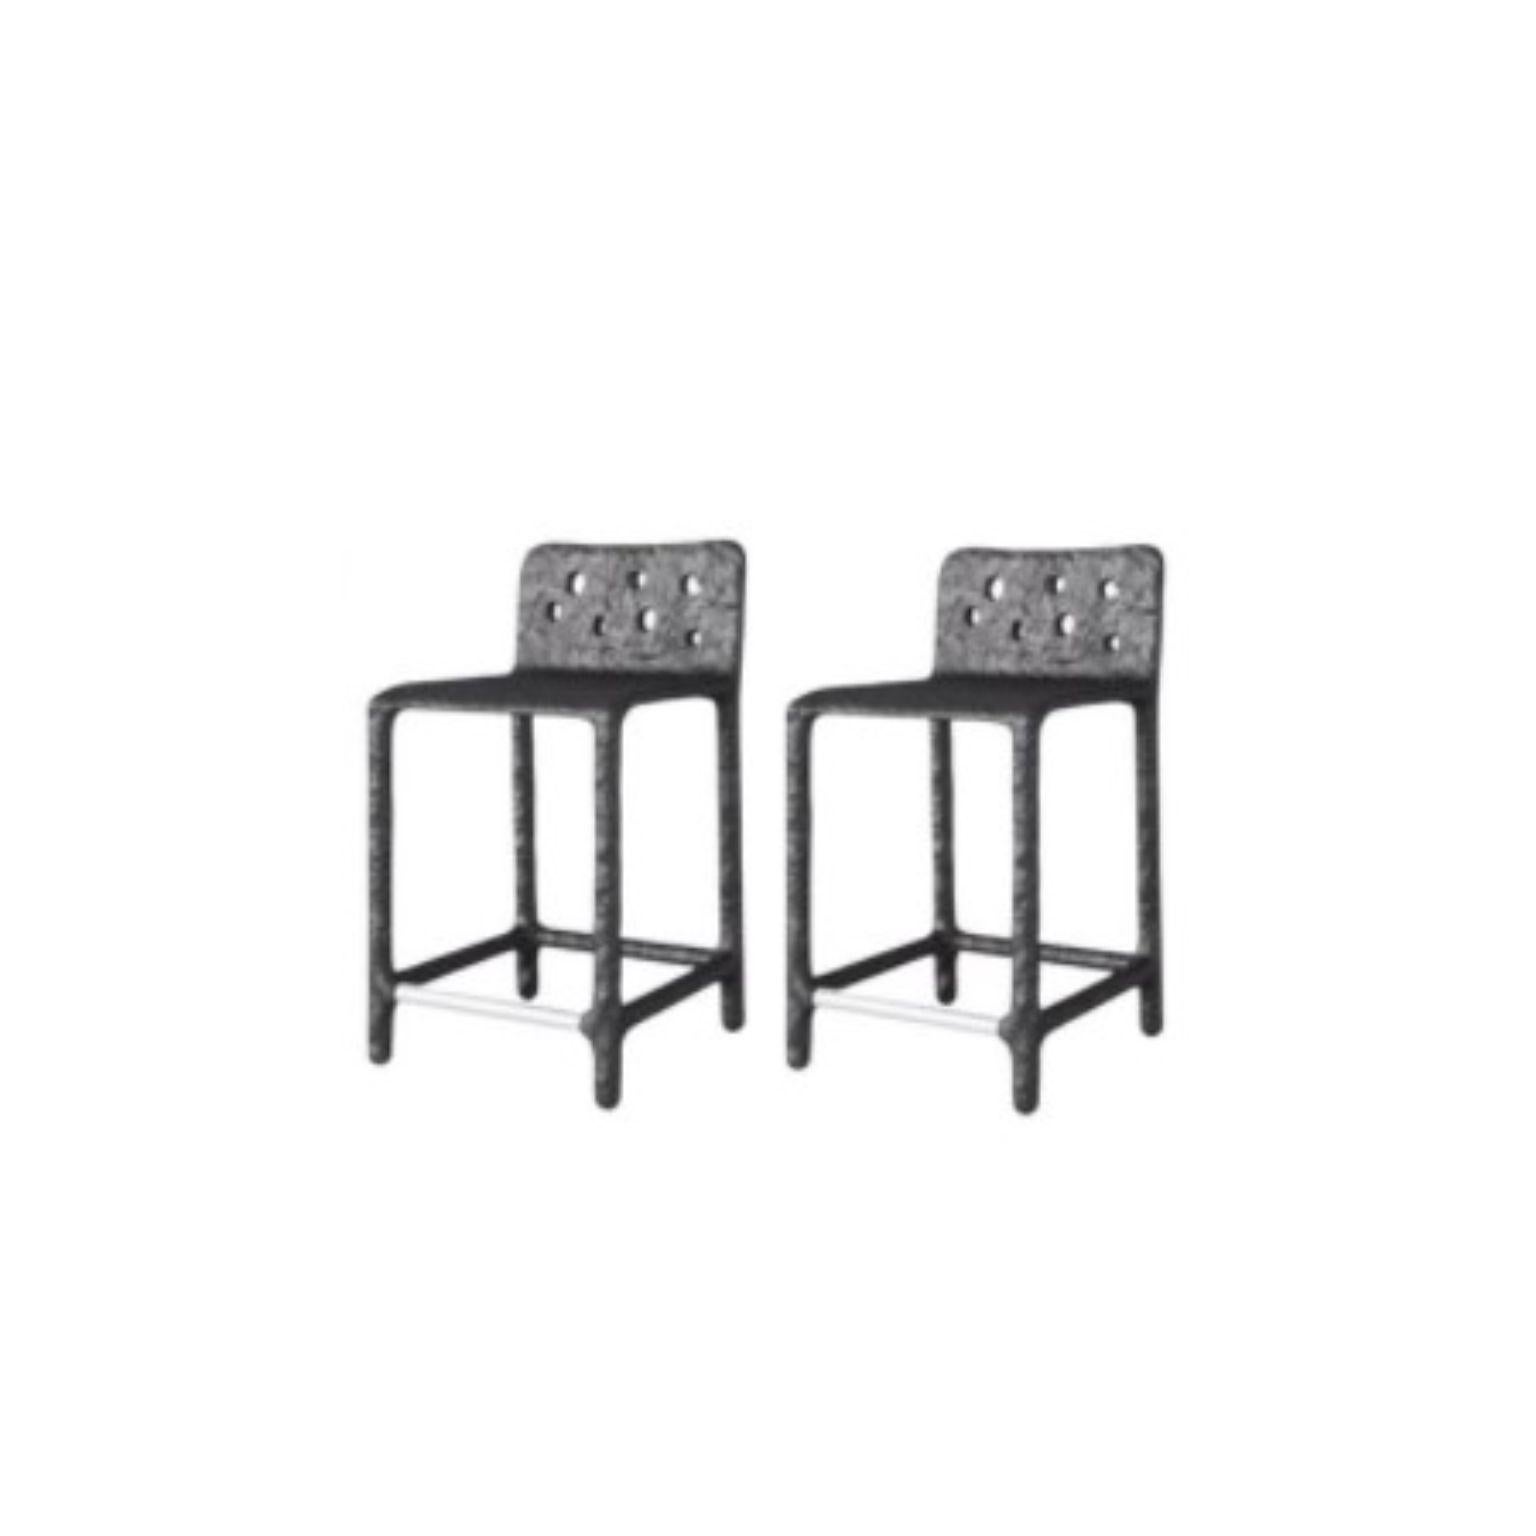 Set of 2 Outdoor black sculpted contemporary half-bar stools by Faina
Design: Victoriya Yakusha
Material: steel, flax rubber, biopolymer, cellulose
Dimensions: W 46 x D 47 x H 84 cm


The plastic silhouette and slightly simple form of ZTISTA